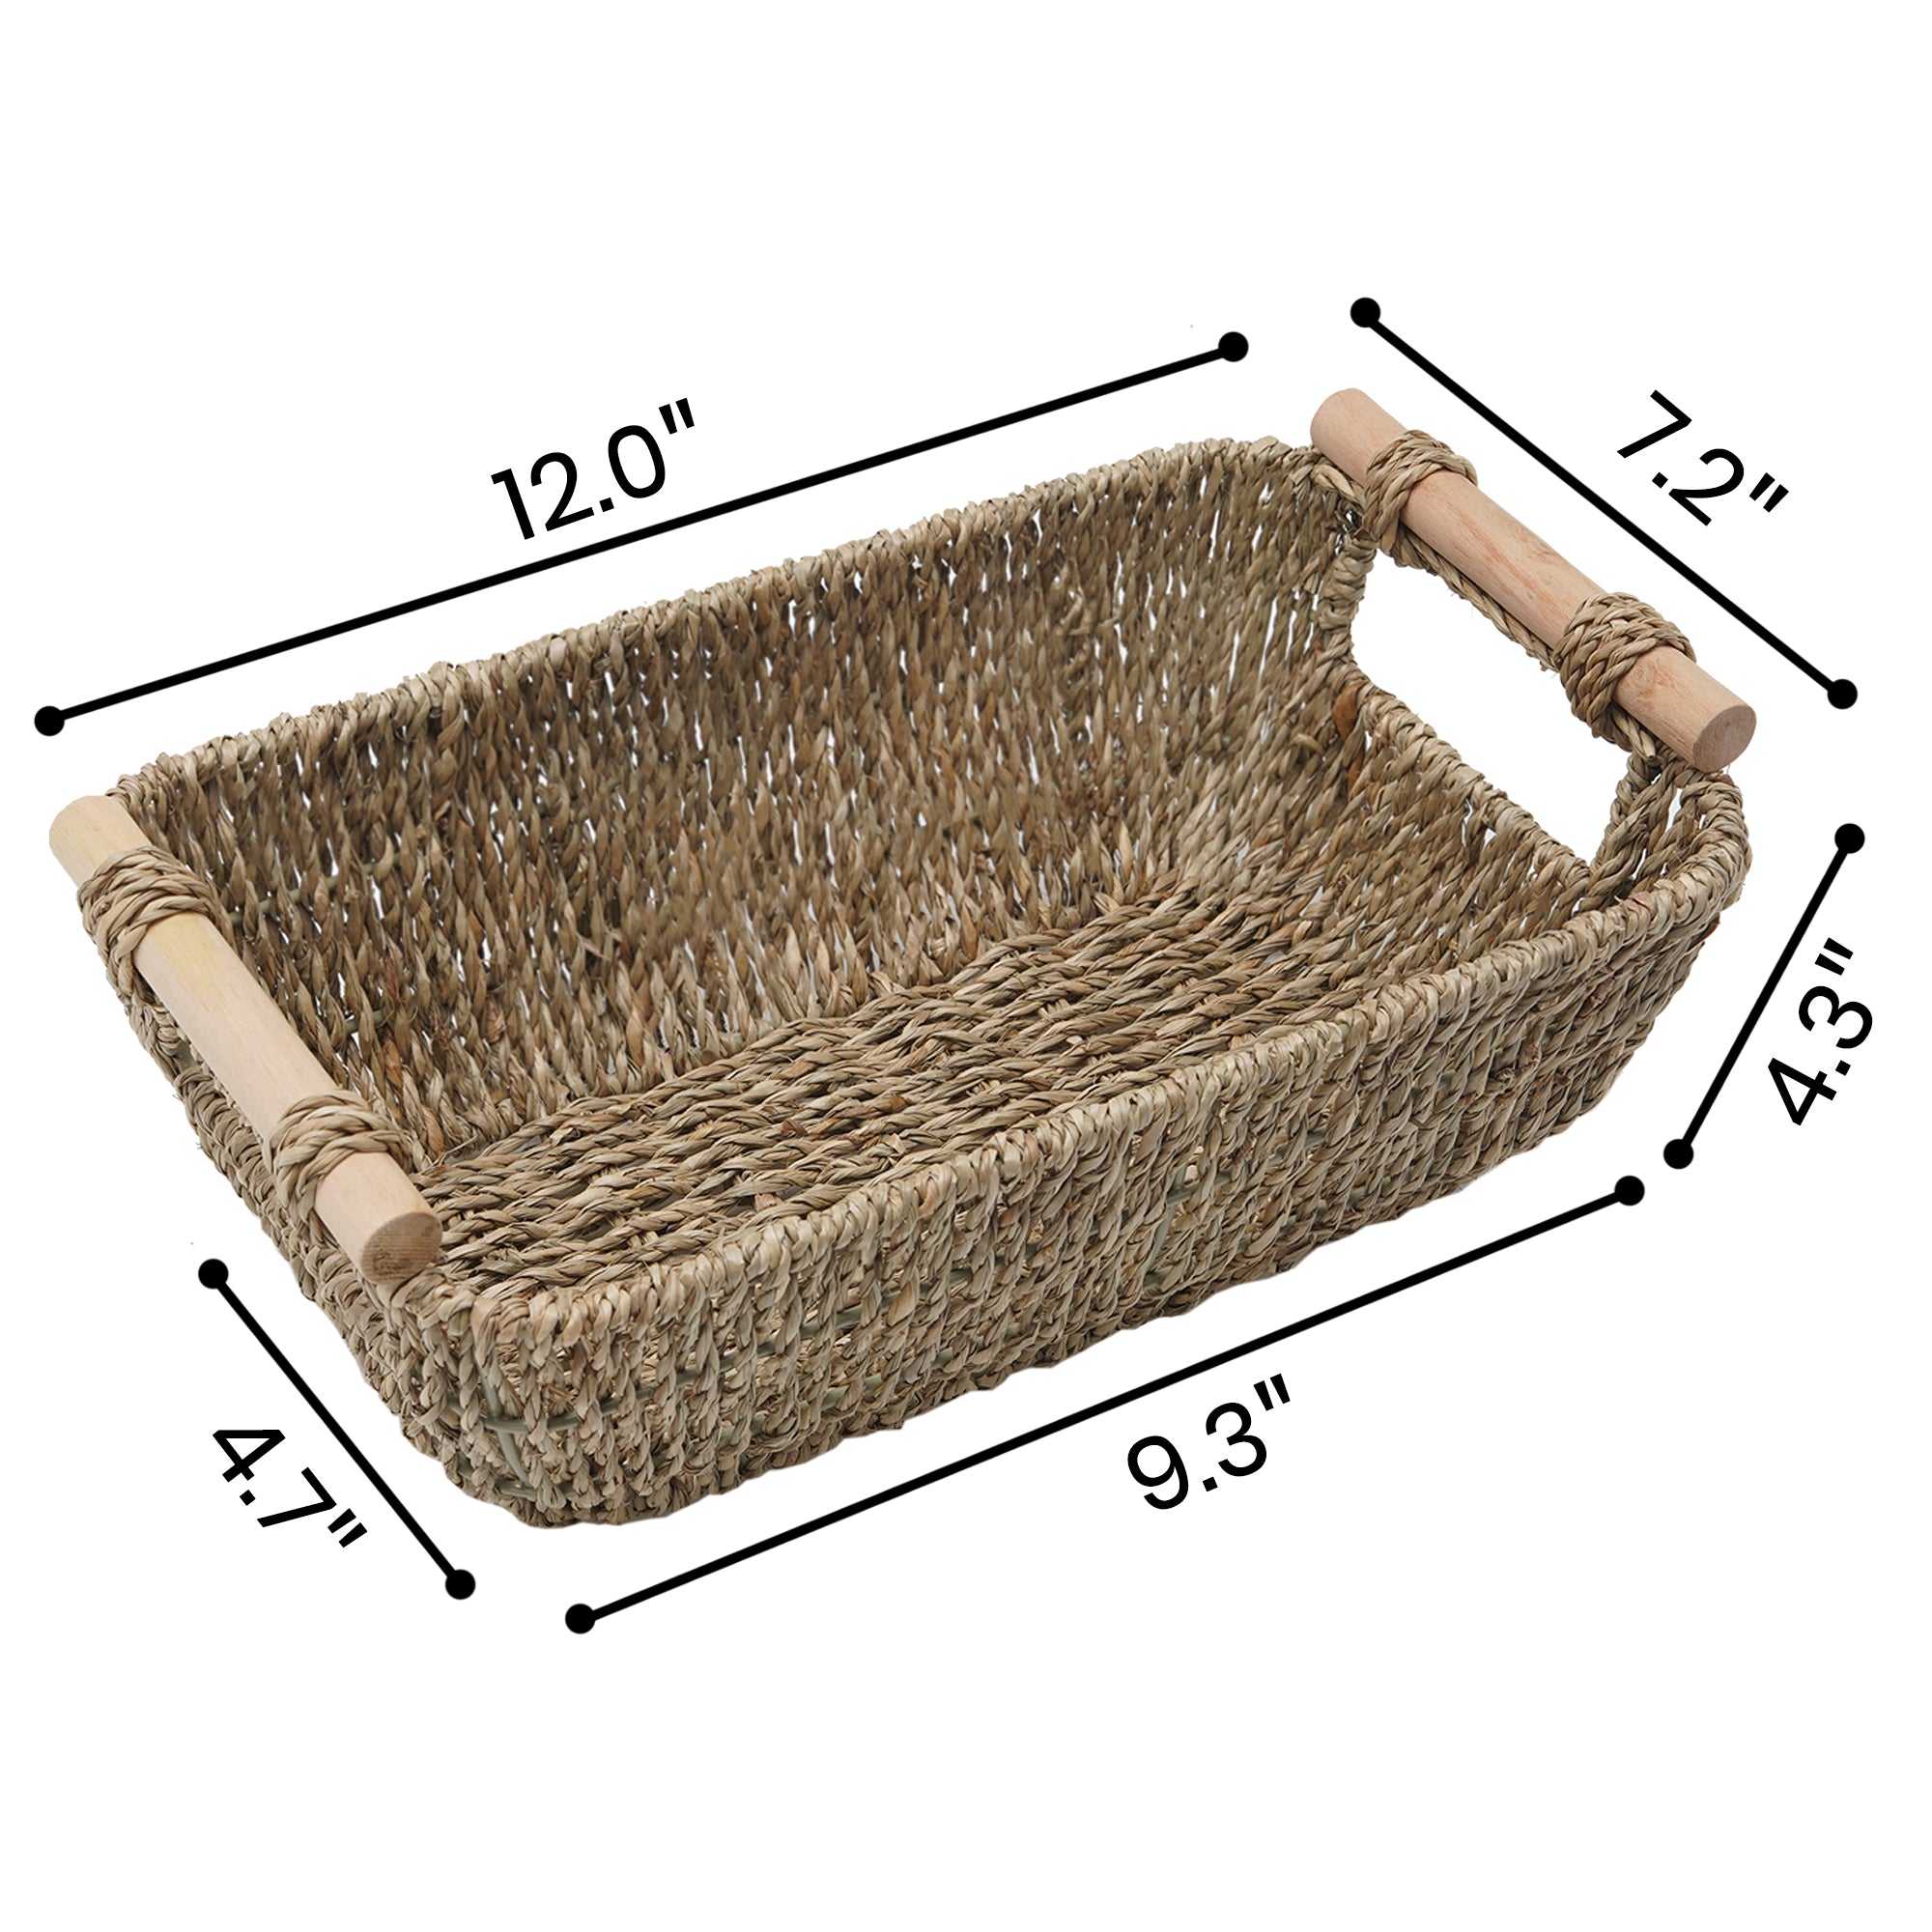 Hand-Woven Small Wicker Baskets with Wooden Handles, 2-pack